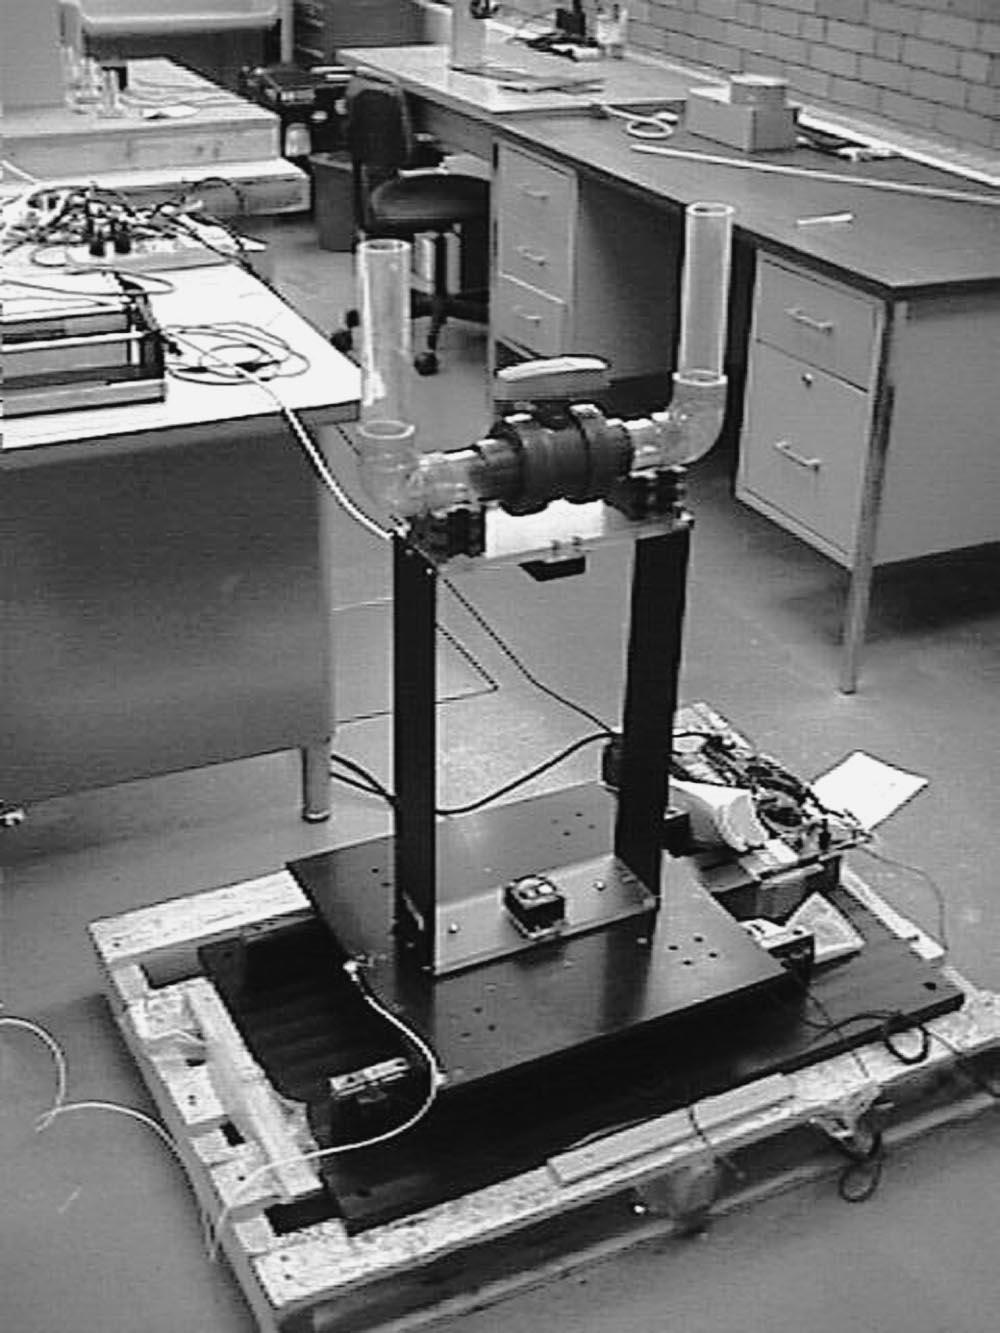 S.K. Yalla, A. Kareem / Engineering Structures 23 (2001) 622 630 623 Fig. 1. Experimental setup for combined structure-tlcd system on a shaking table.